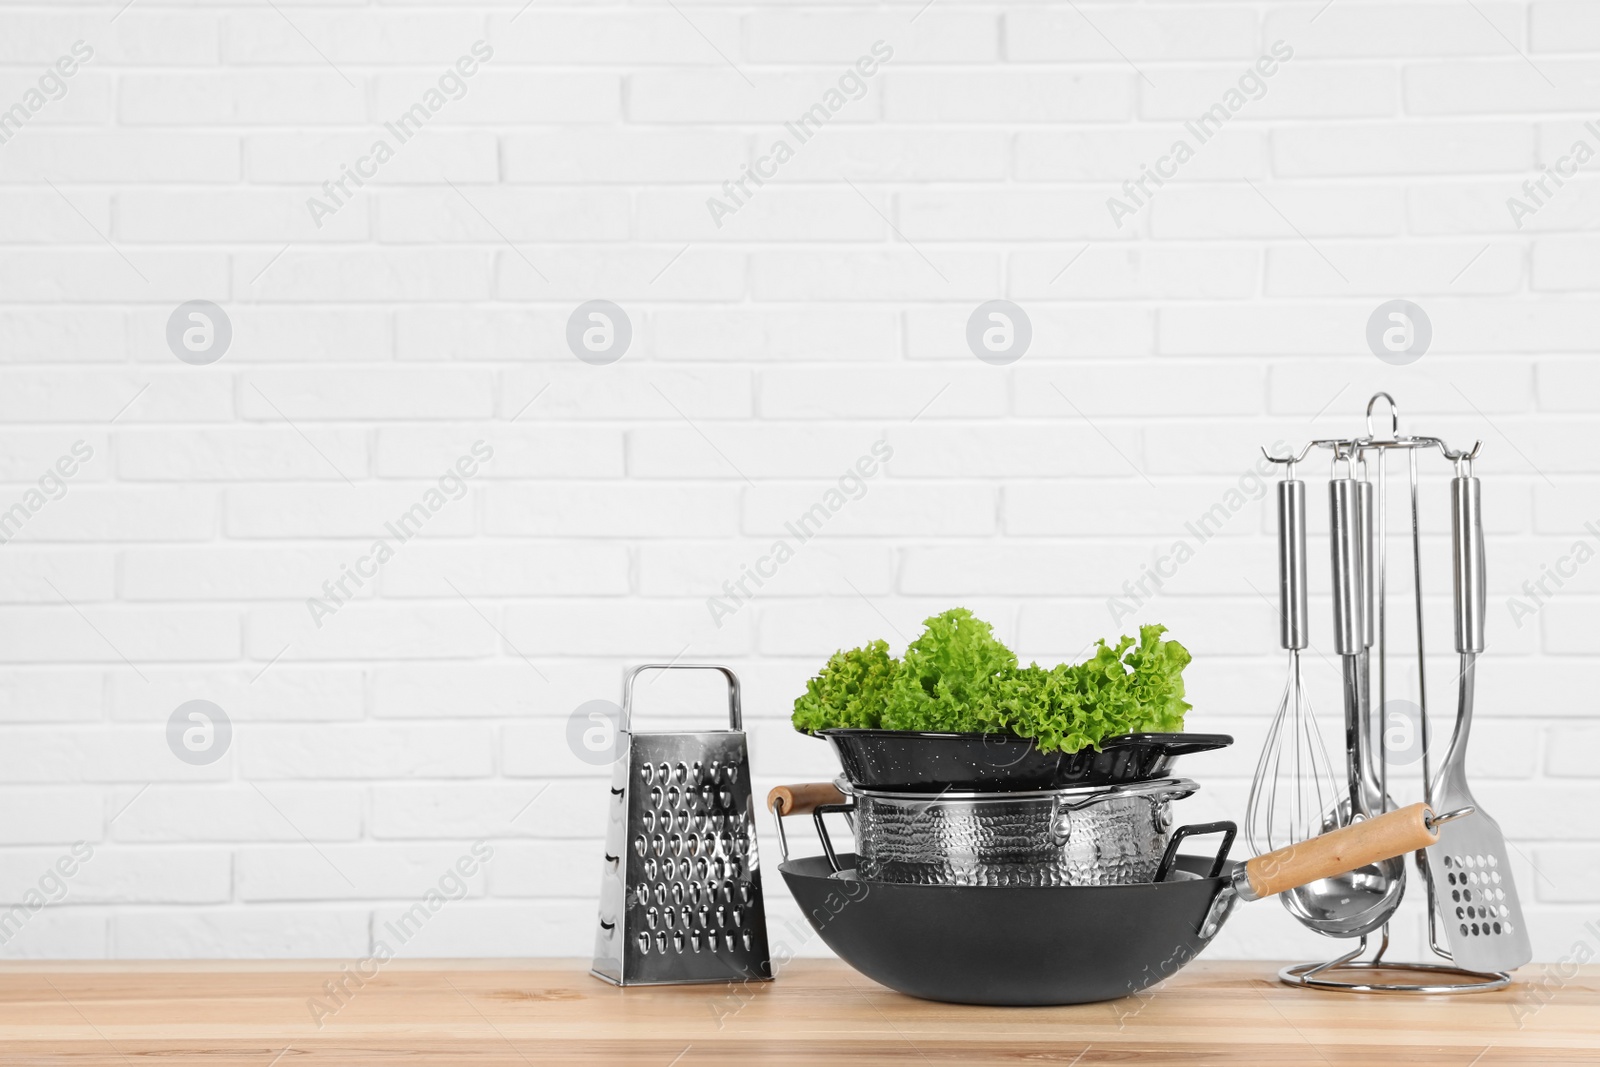 Photo of Set of clean cookware, utensils and lettuce on table against  white brick wall. Space for text